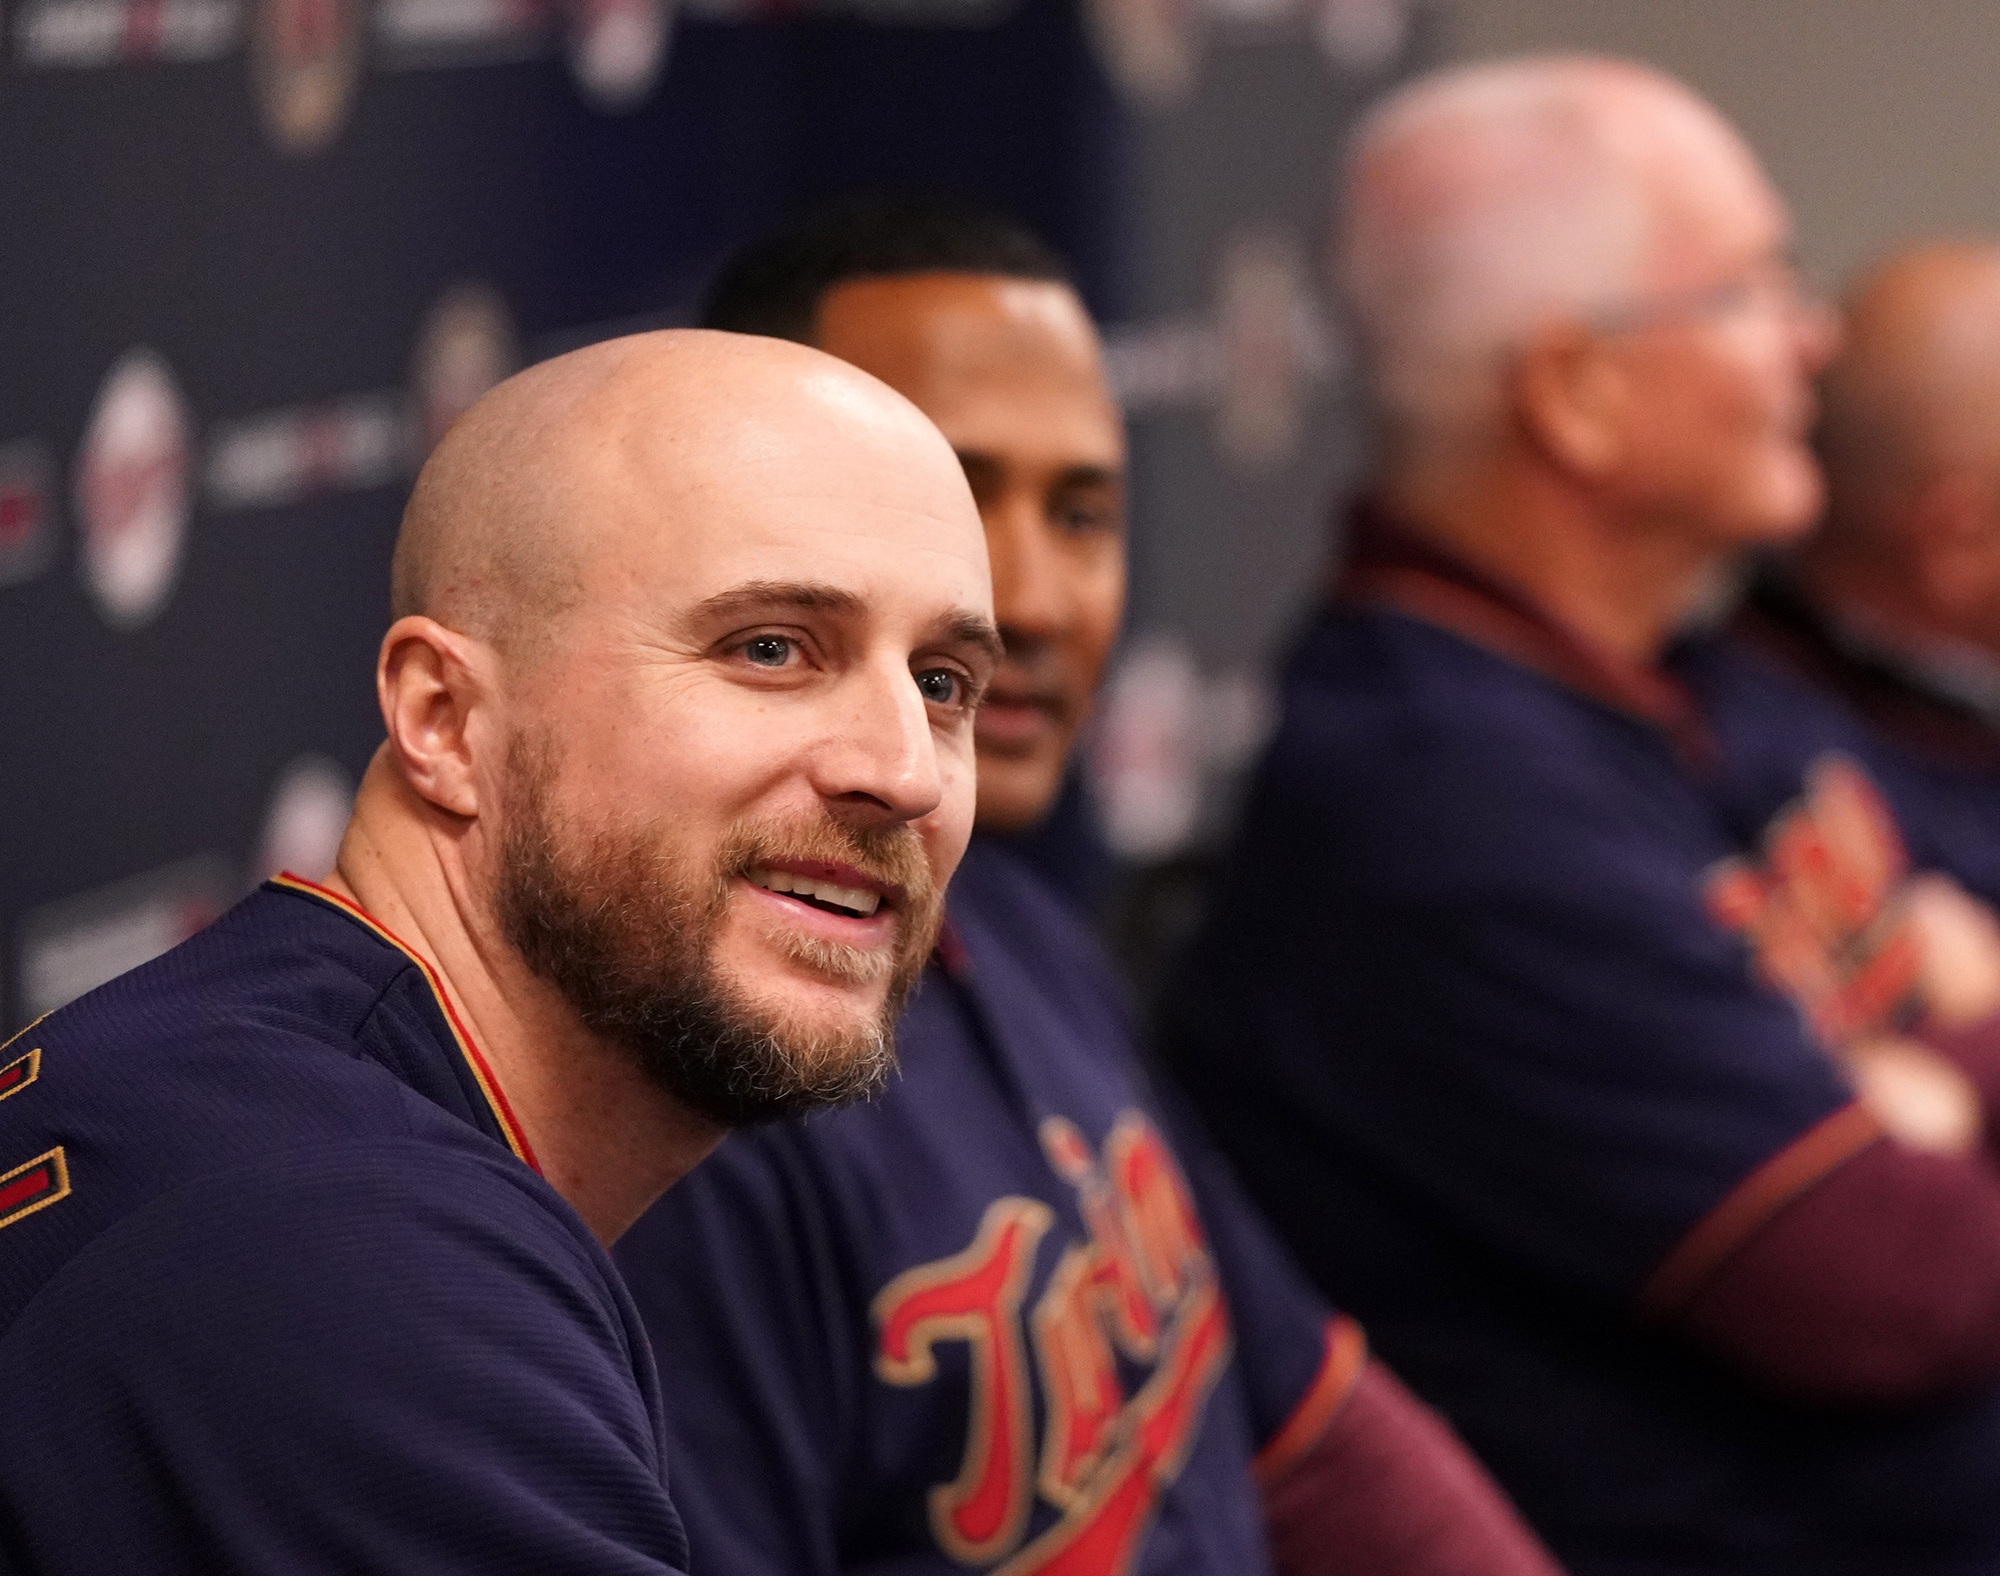 New manager Rocco Baldelli’s expectations for his team include having a little bit of fun.